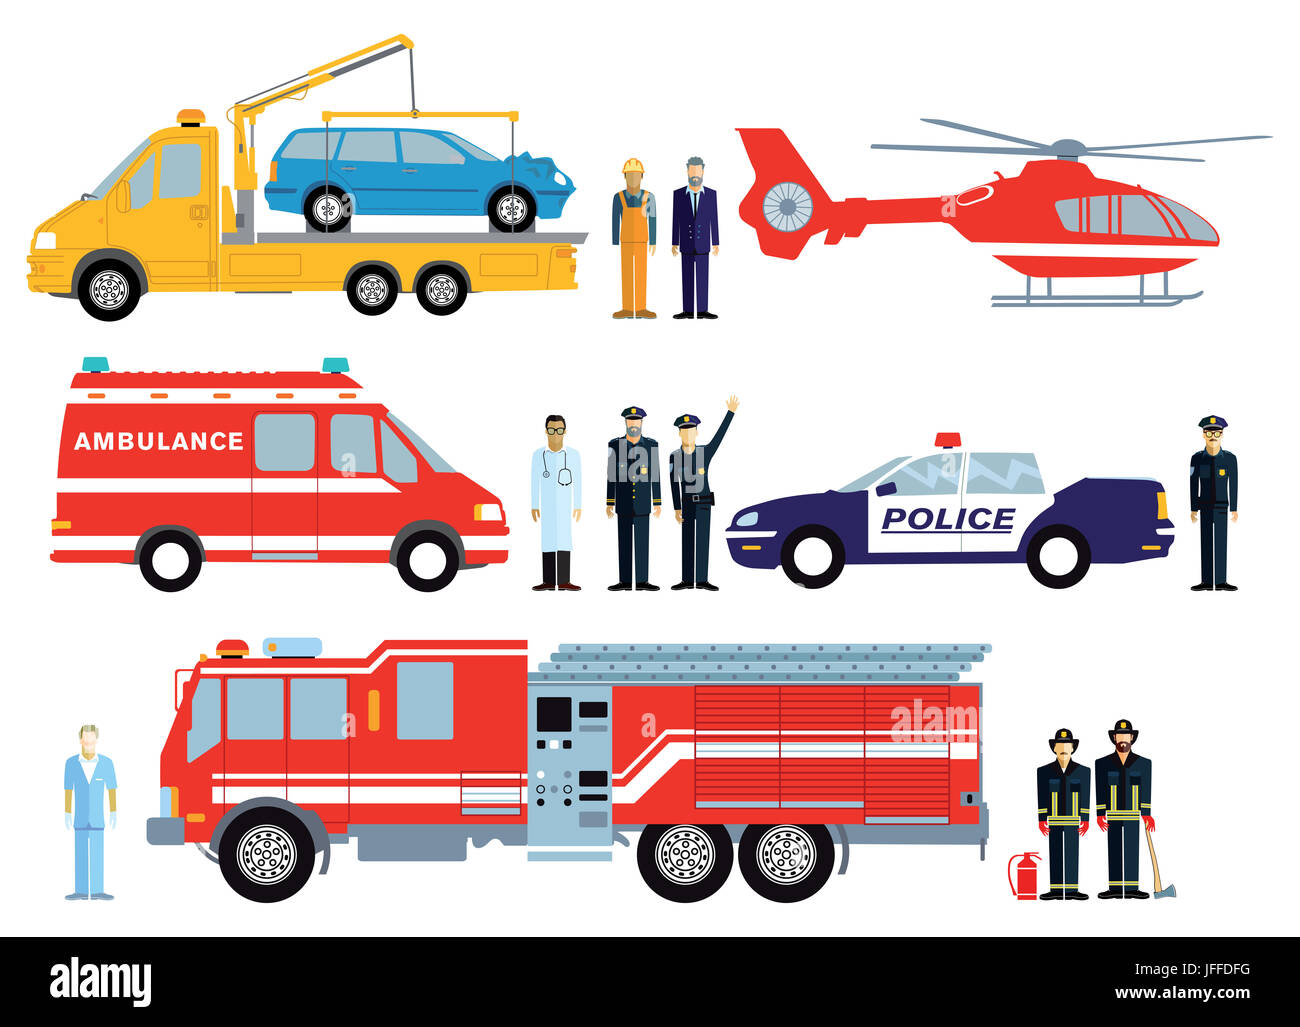 Fire brigade, police and rescue vehicle Stock Photo